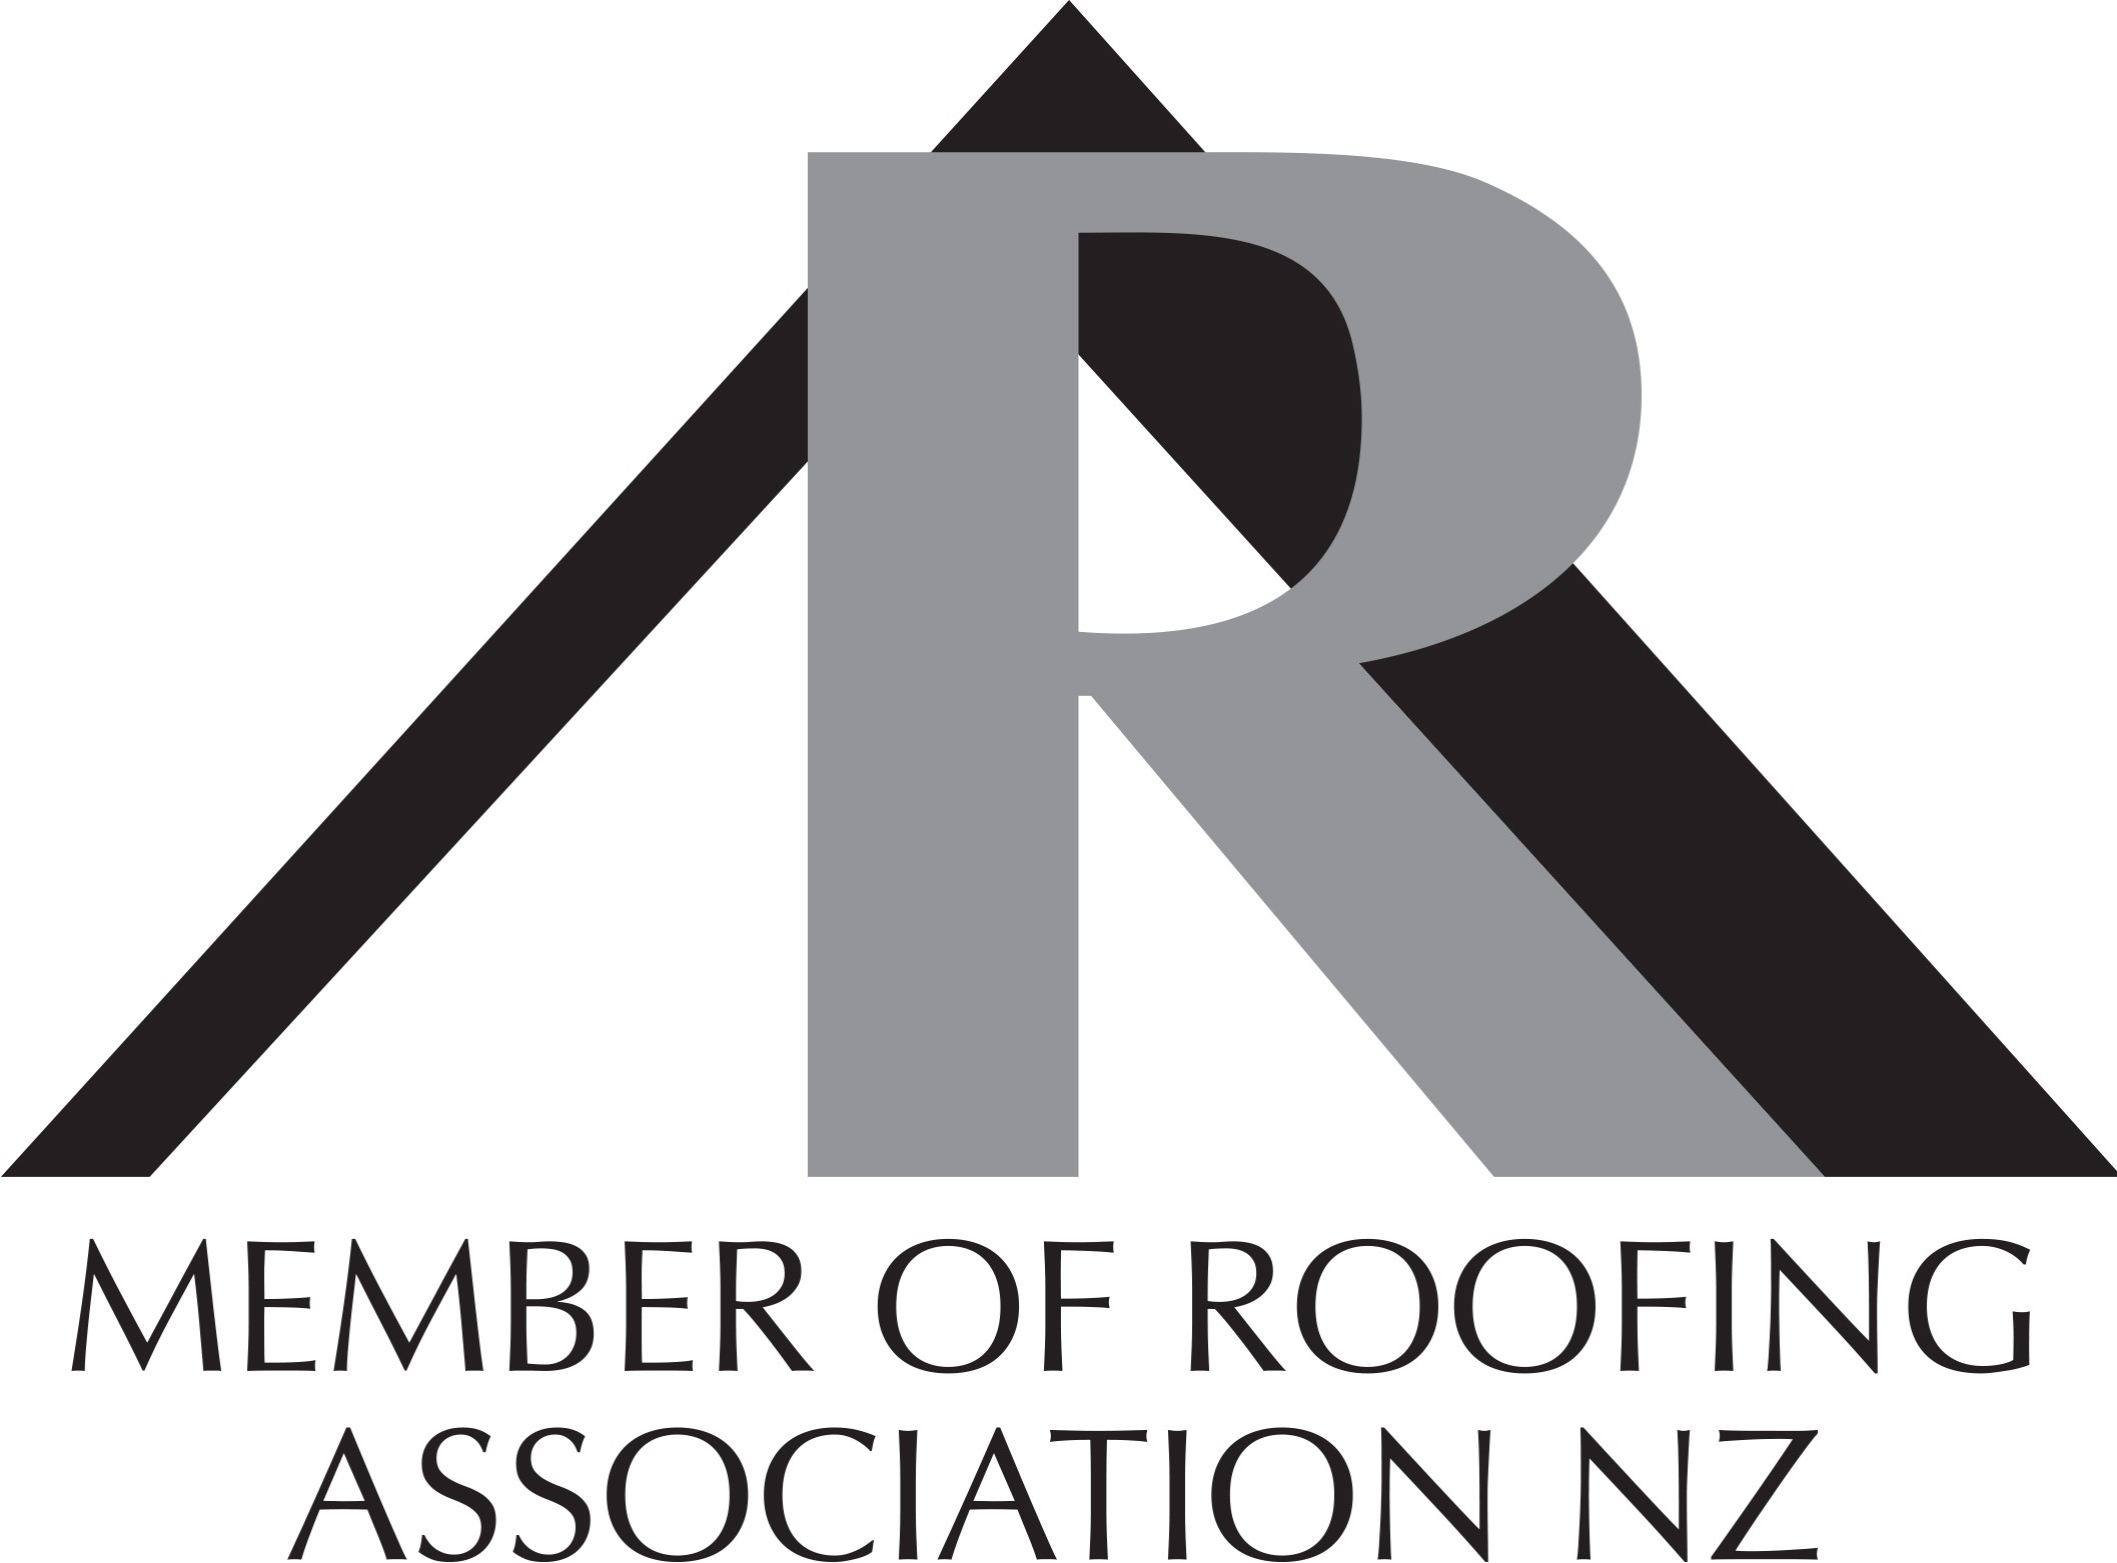 Roofing Association of New Zealand